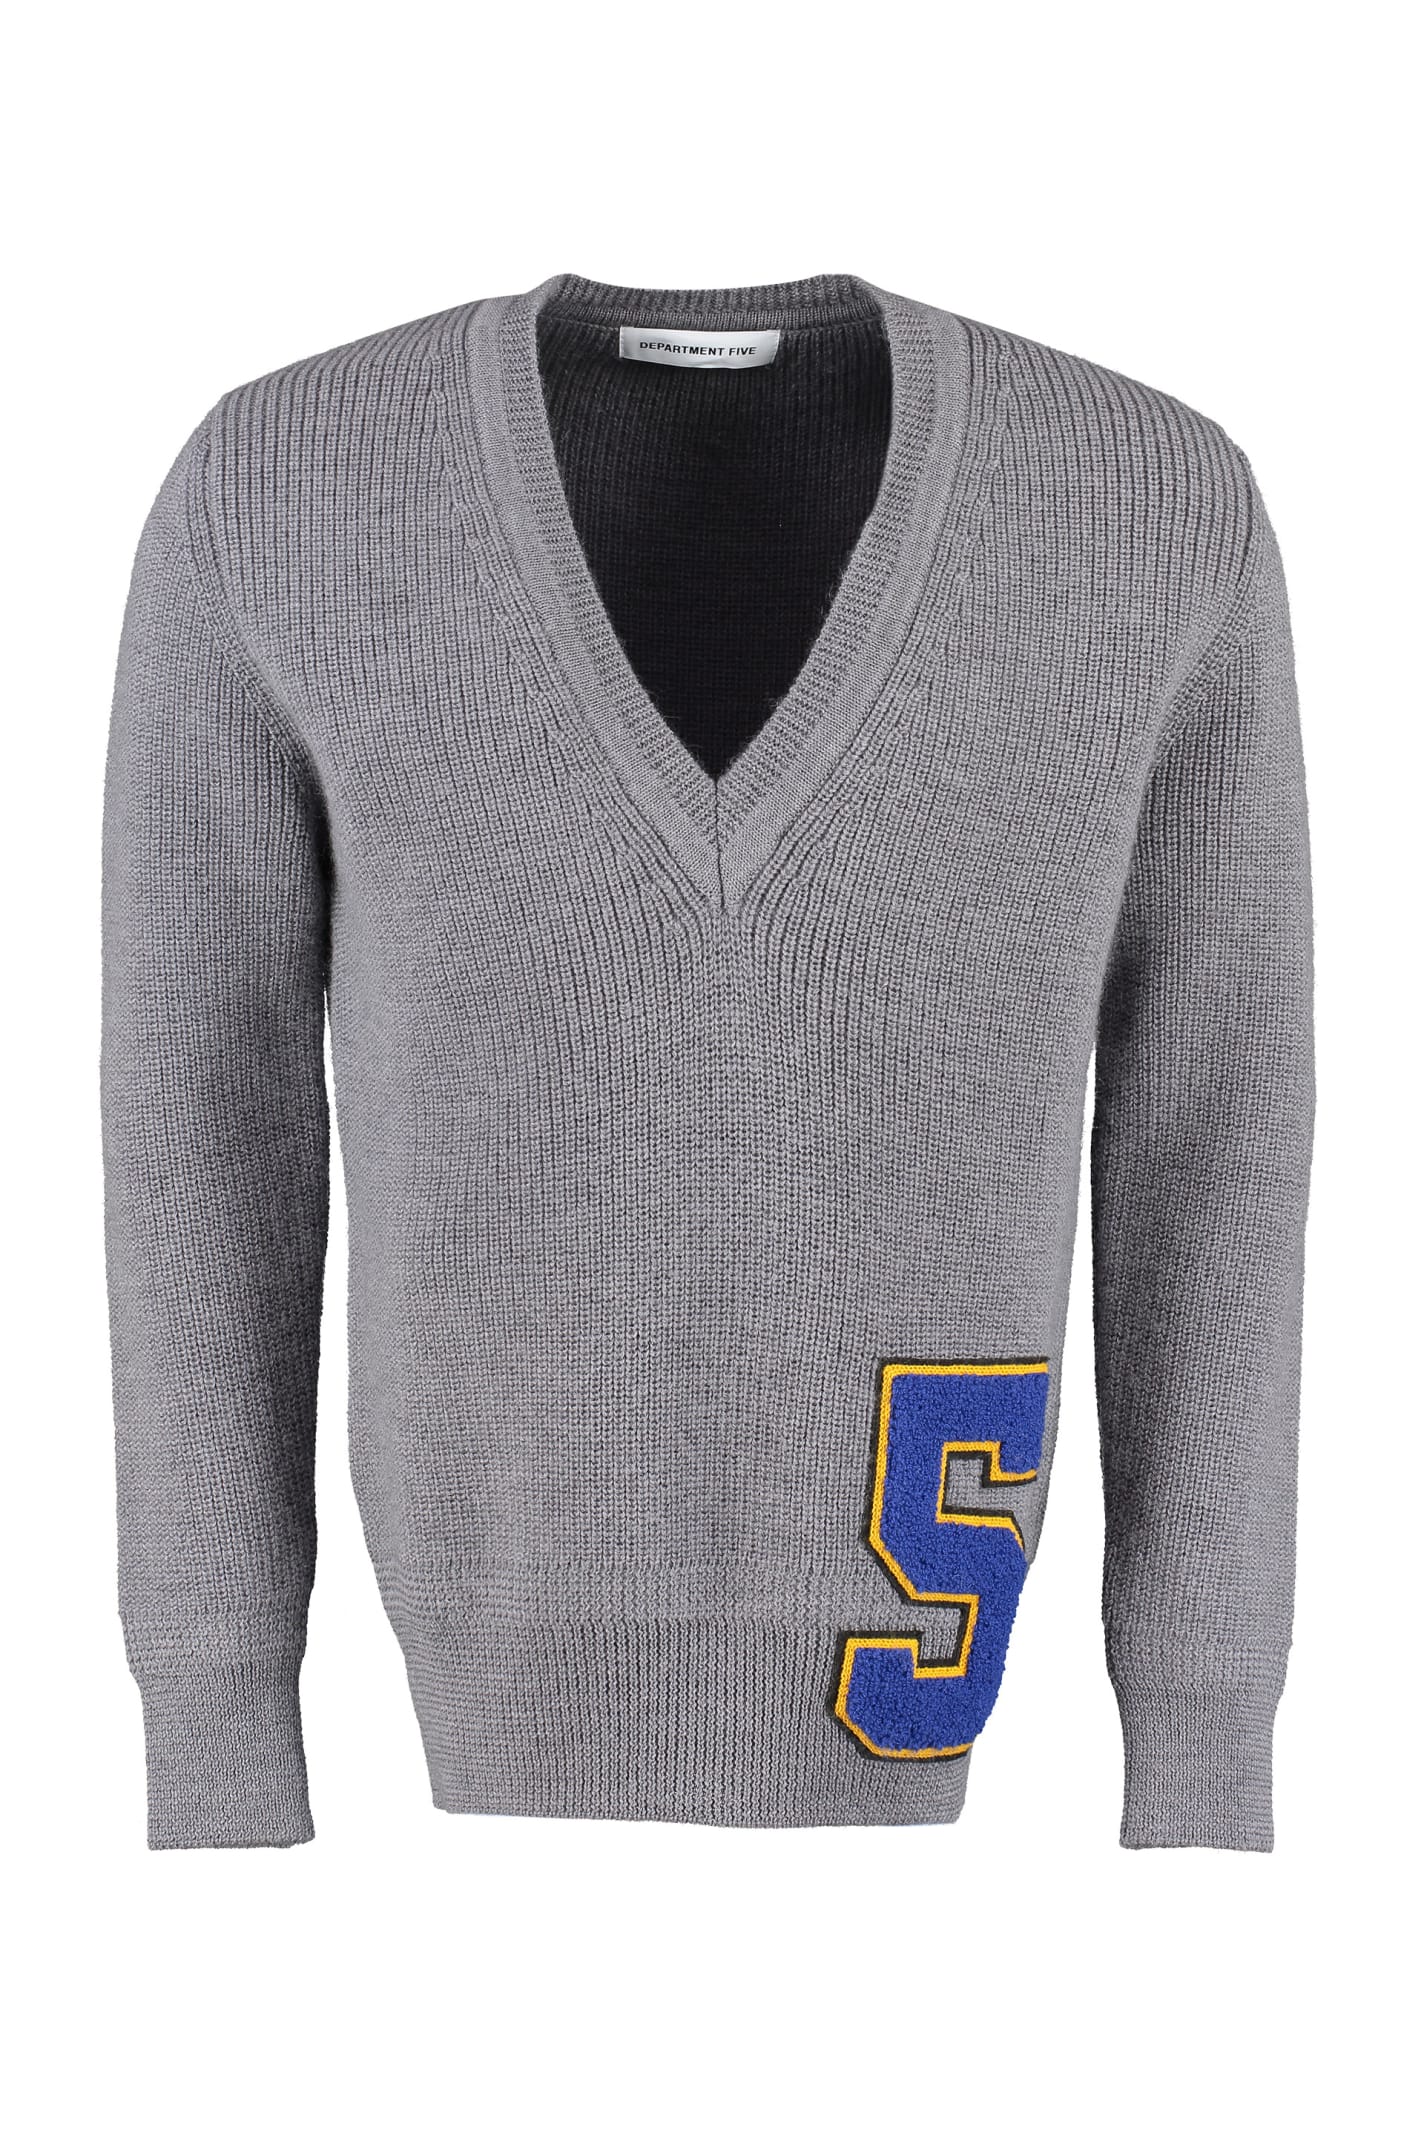 Department Five V-neck Sweater